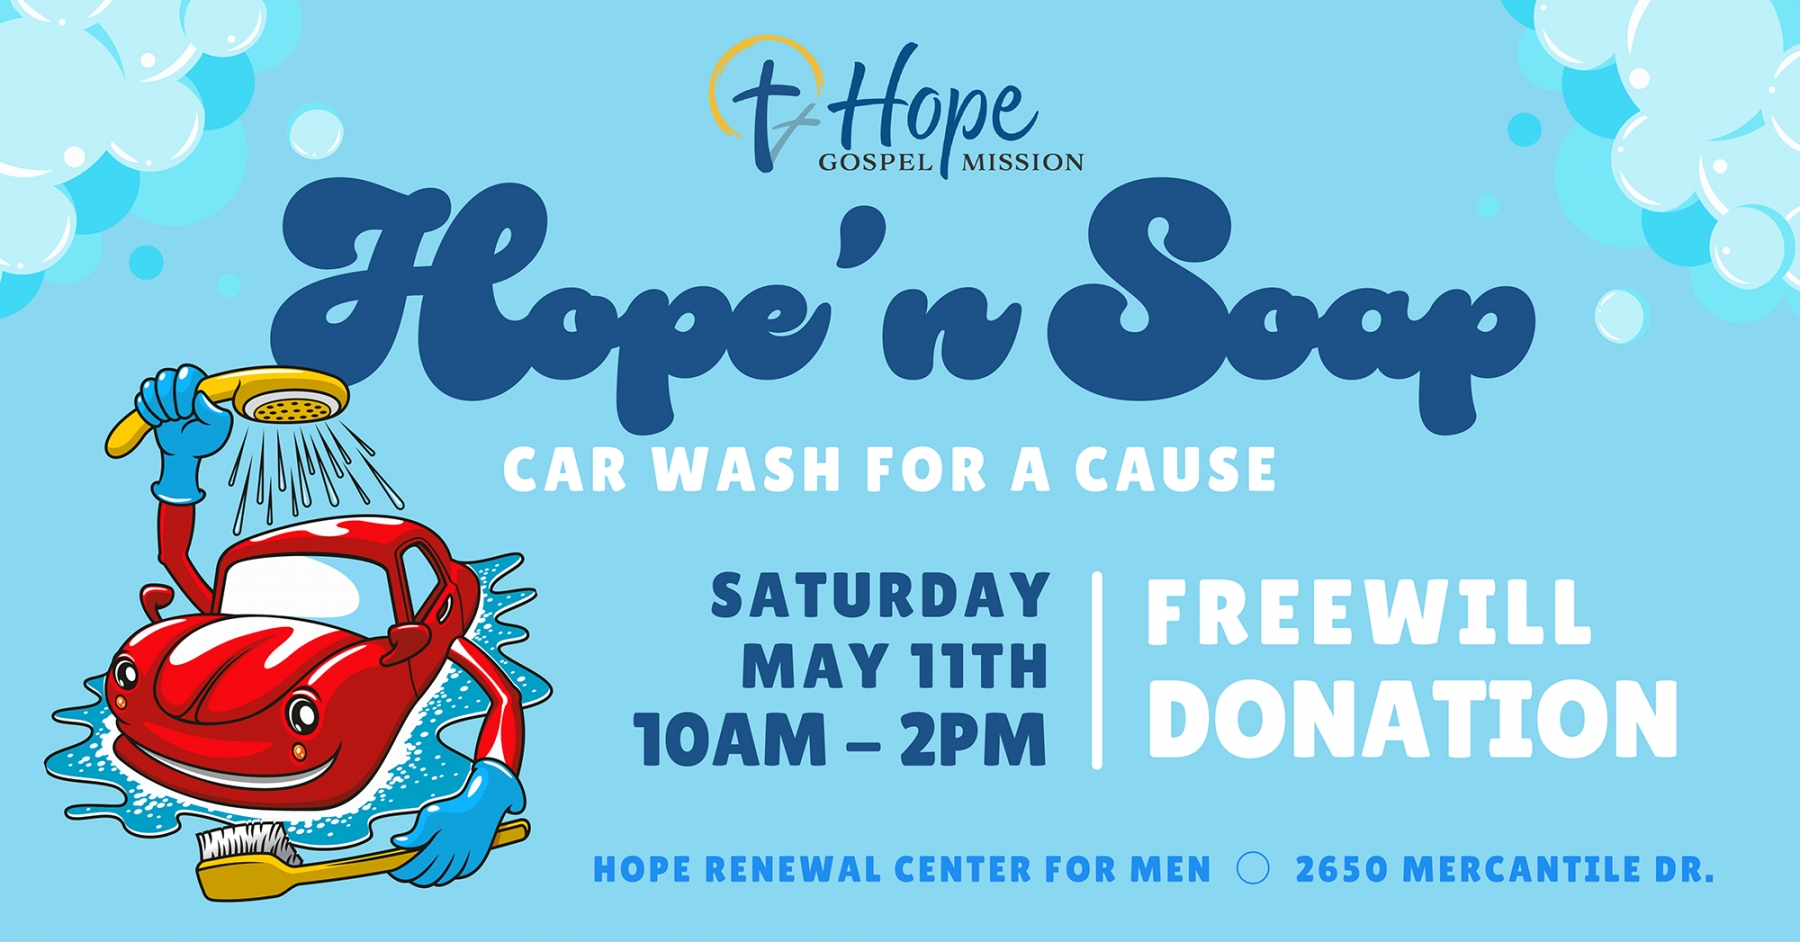 Hope 'n Soap, a car wash for a cause, fundraiser flyer. Flyer features a photo of a red car being washed along with information about the fundraiser for Hope Gospel Mission's Hope Learning Center Campaign.